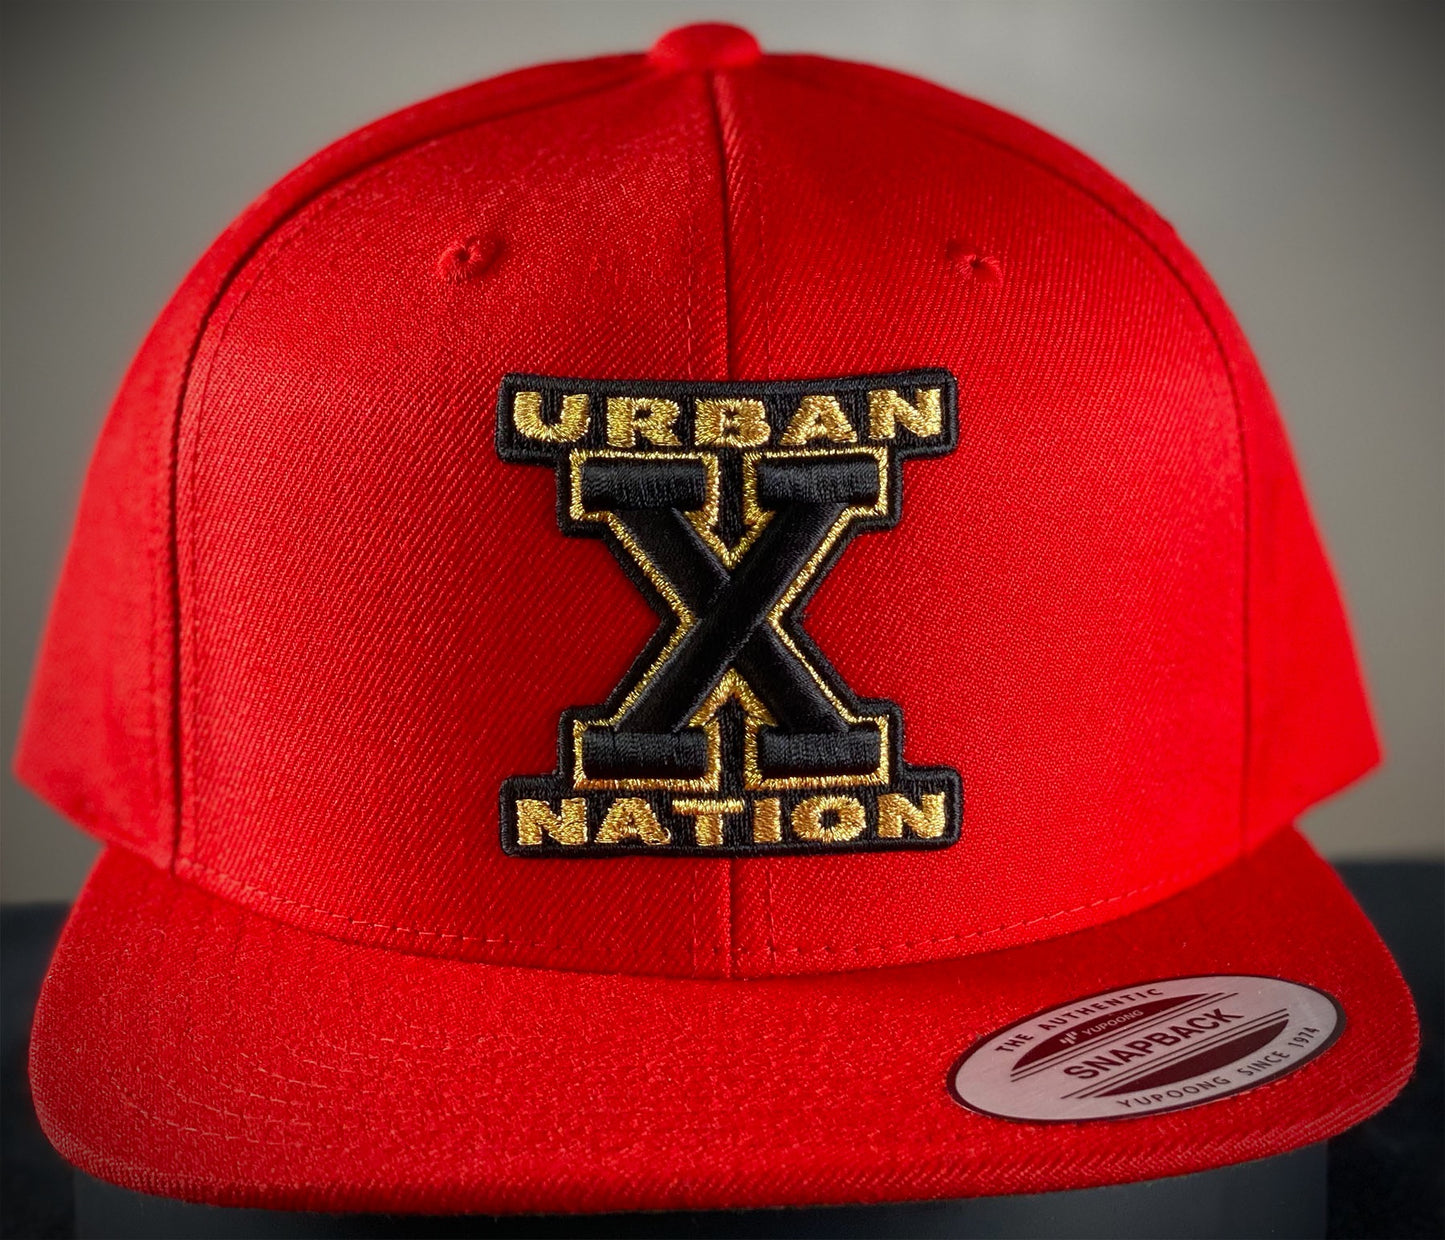 Snapback Urban X Nation (Embroidered)